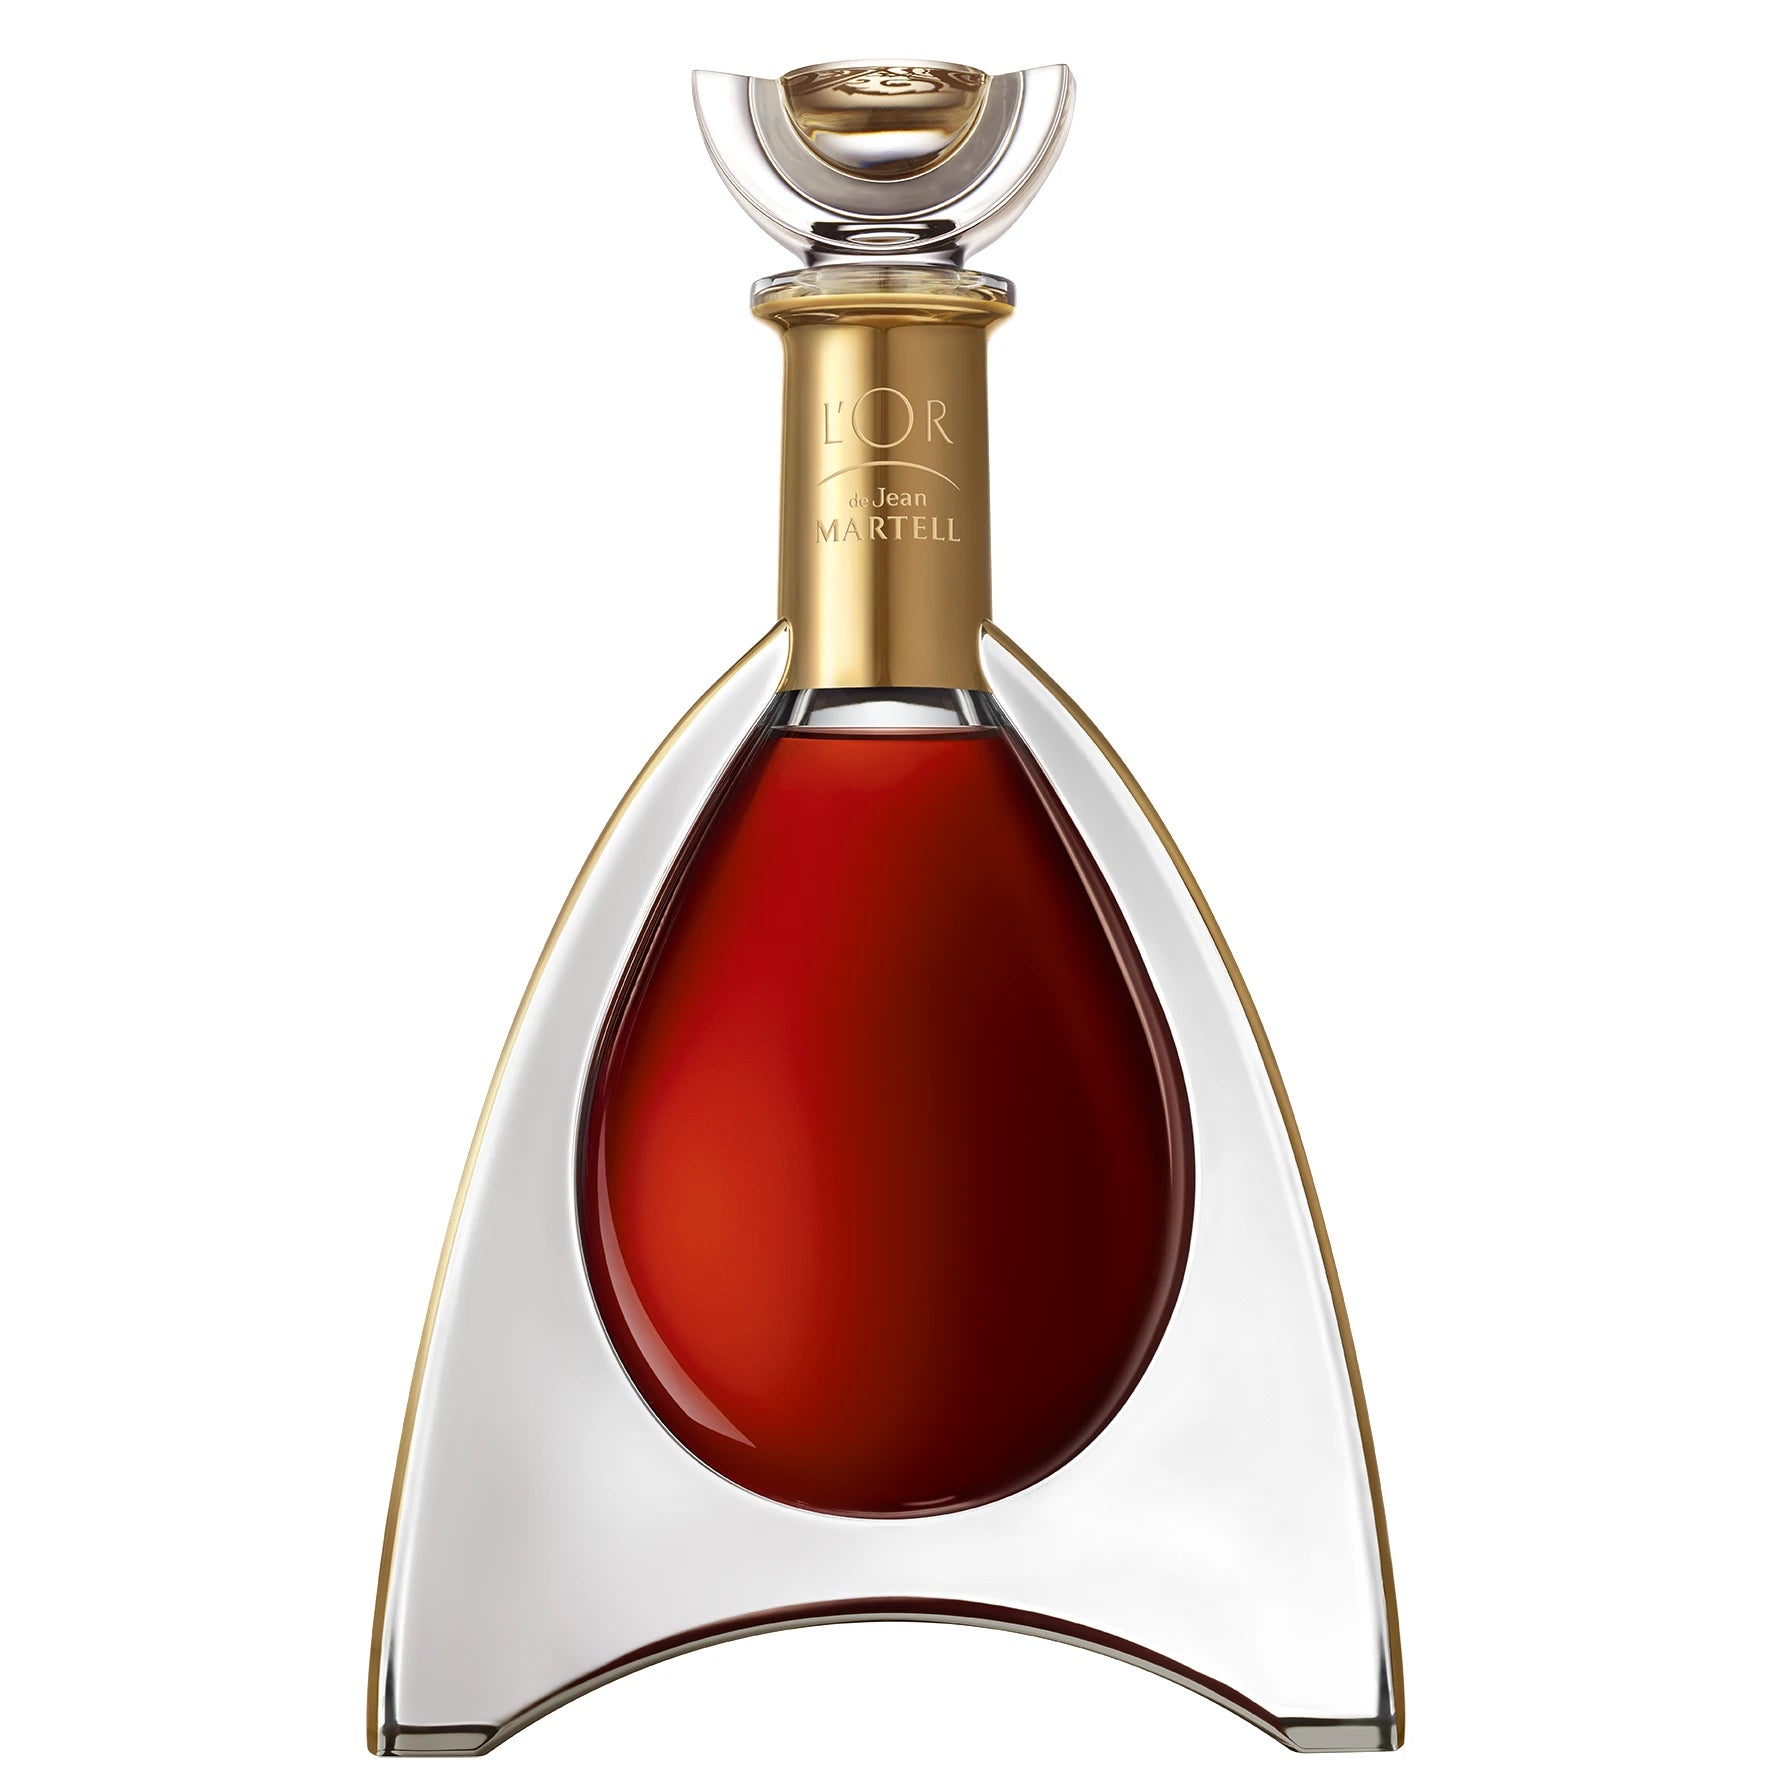 Hennessy XO Luminous Label 0,7L 40%  ExcaliburShop - Online alcohol sales  from around the world